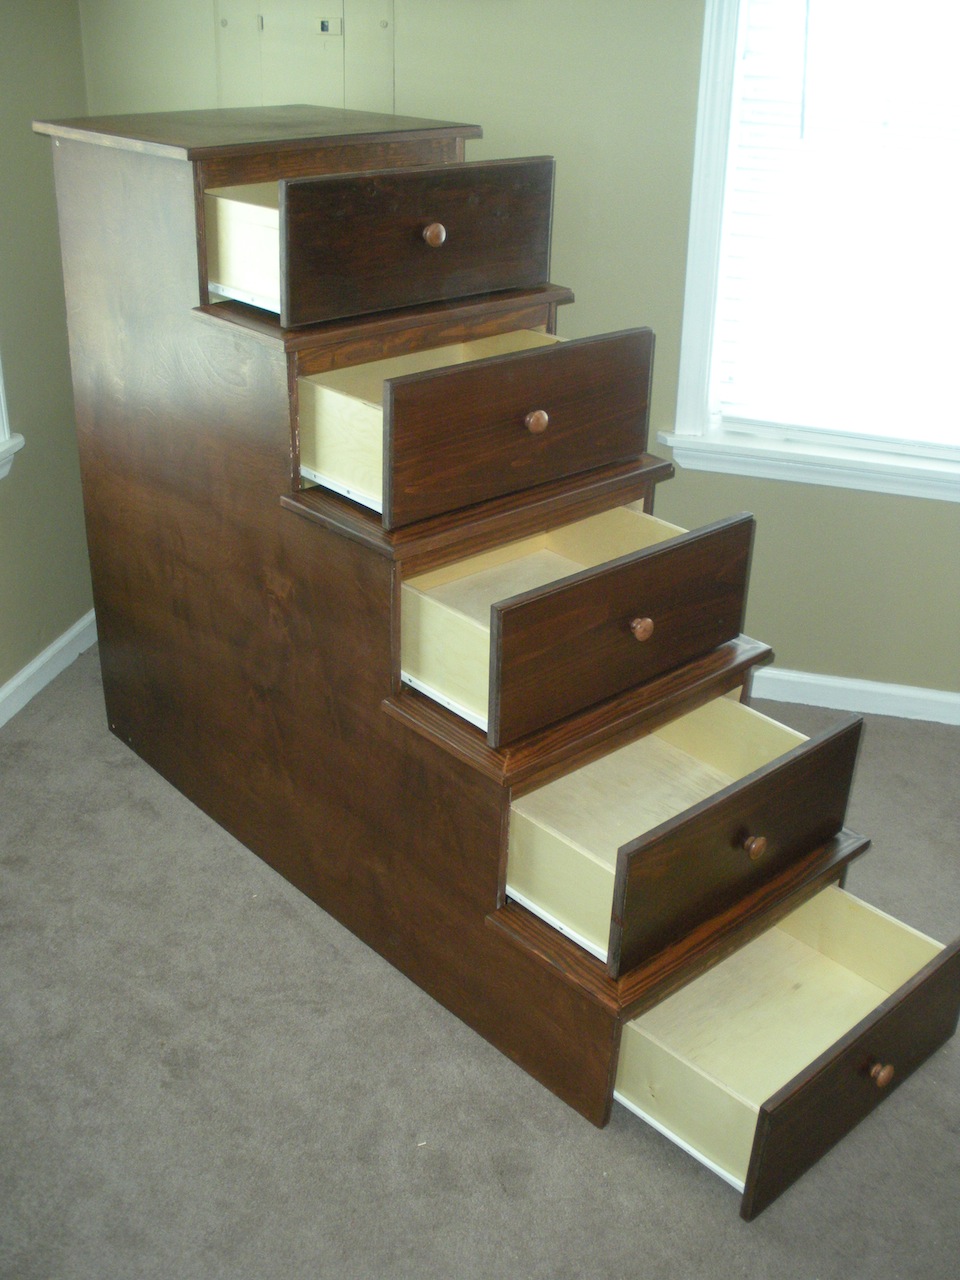 Richard S Bunk Bed Storage The Wood, Bunk Bed Stairs With Drawers Plans